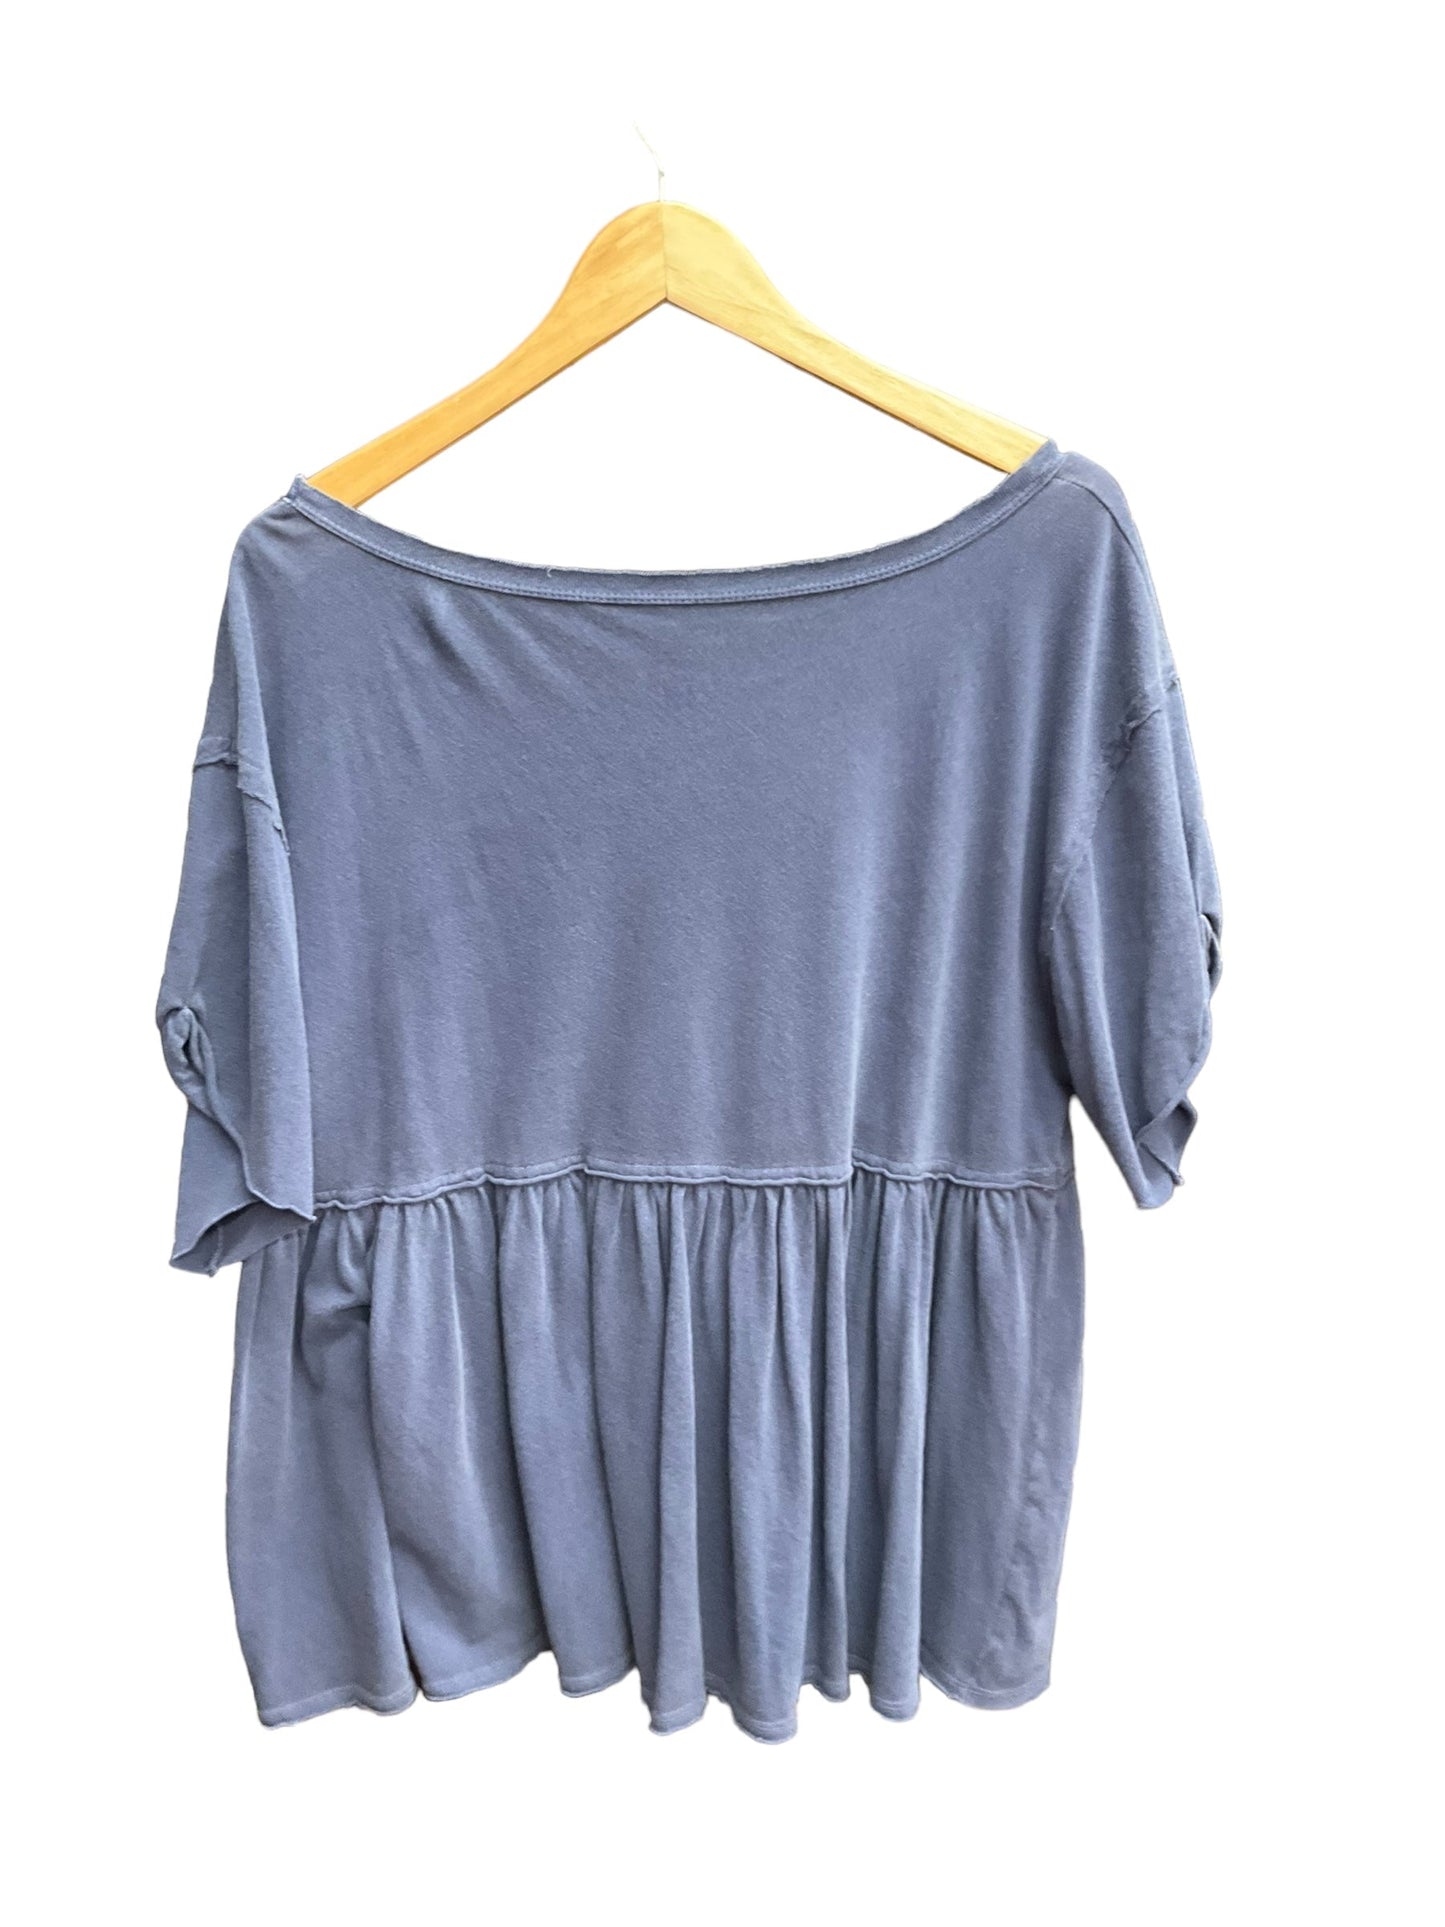 Blue Top Short Sleeve Free People, Size M